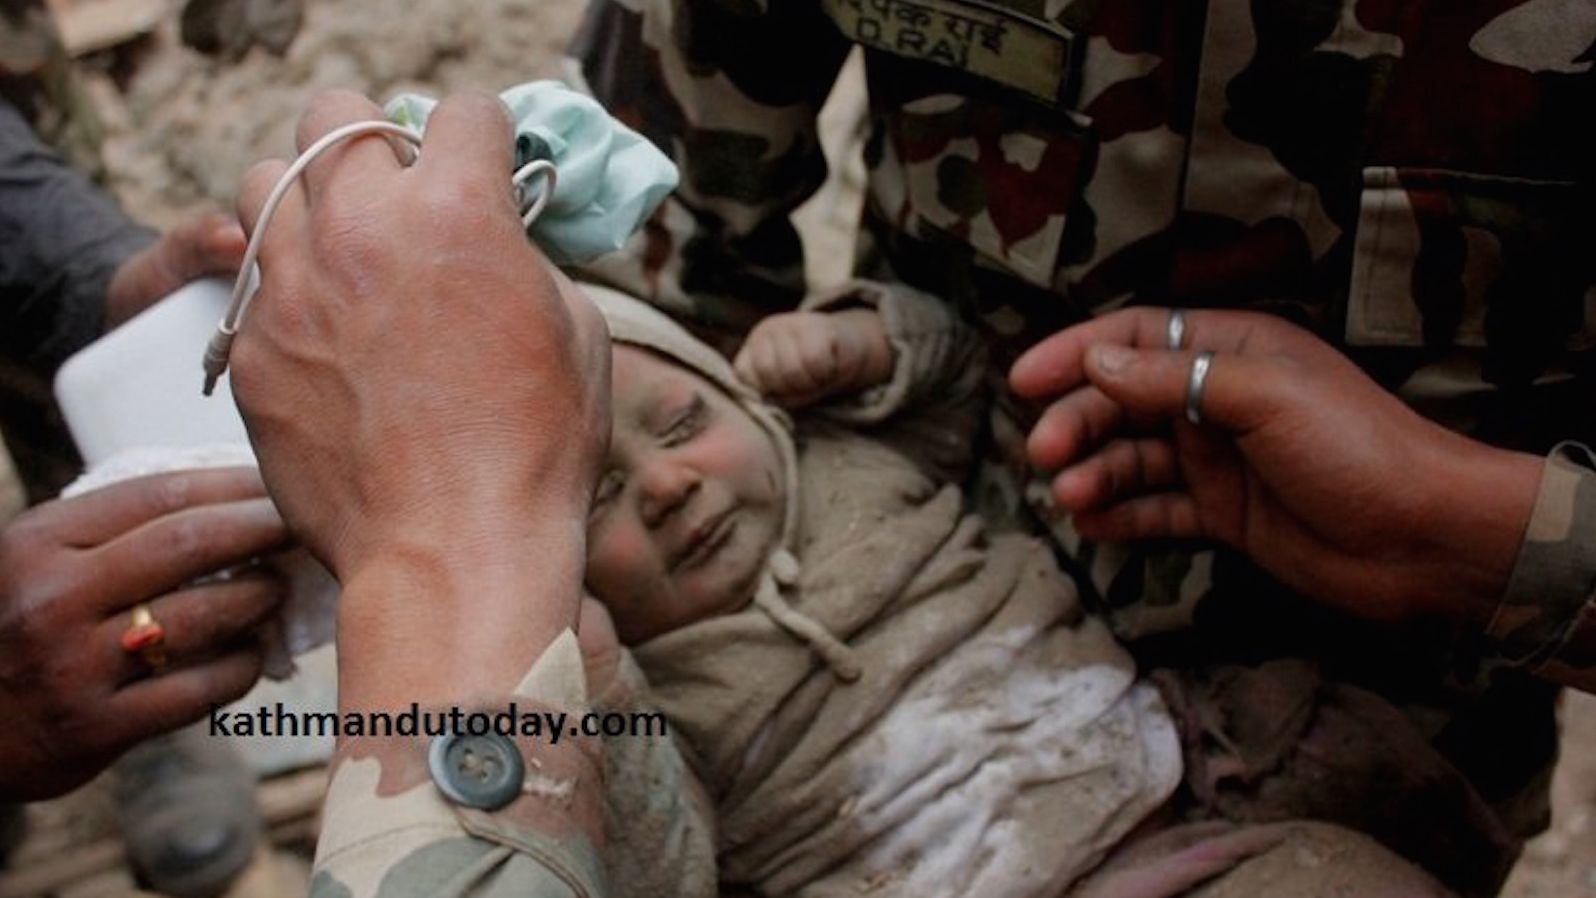 A 4-month-old boy was pulled from rubble at least 22 hours after Saturday's earthquake in Nepal.